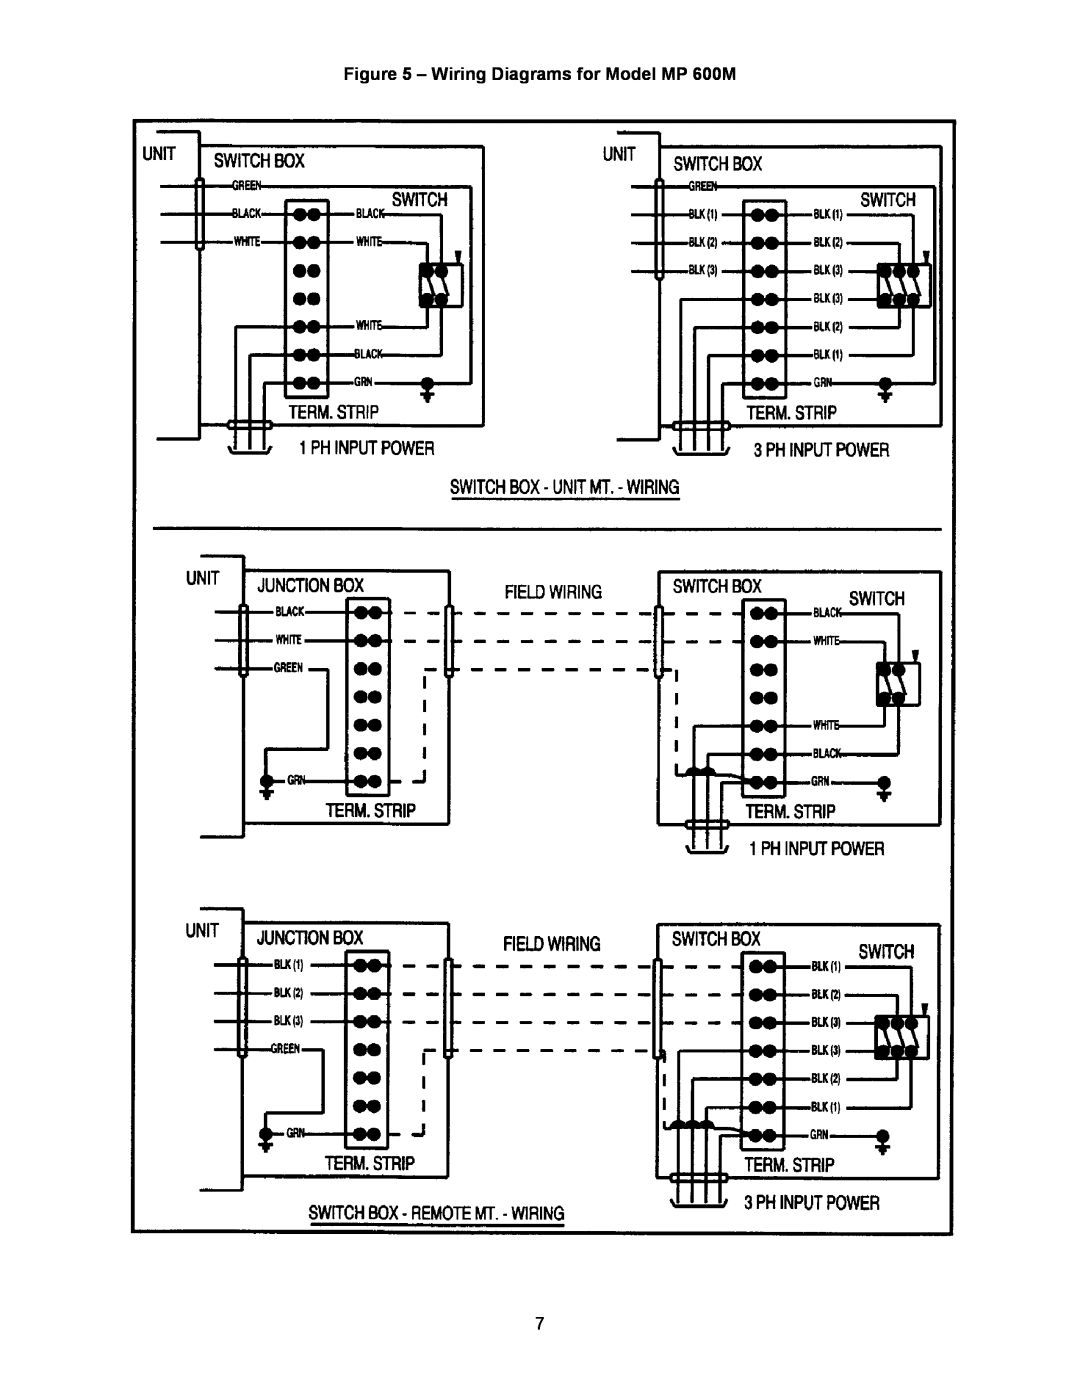 Trion manual Wiring Diagrams for Model MP 600M 